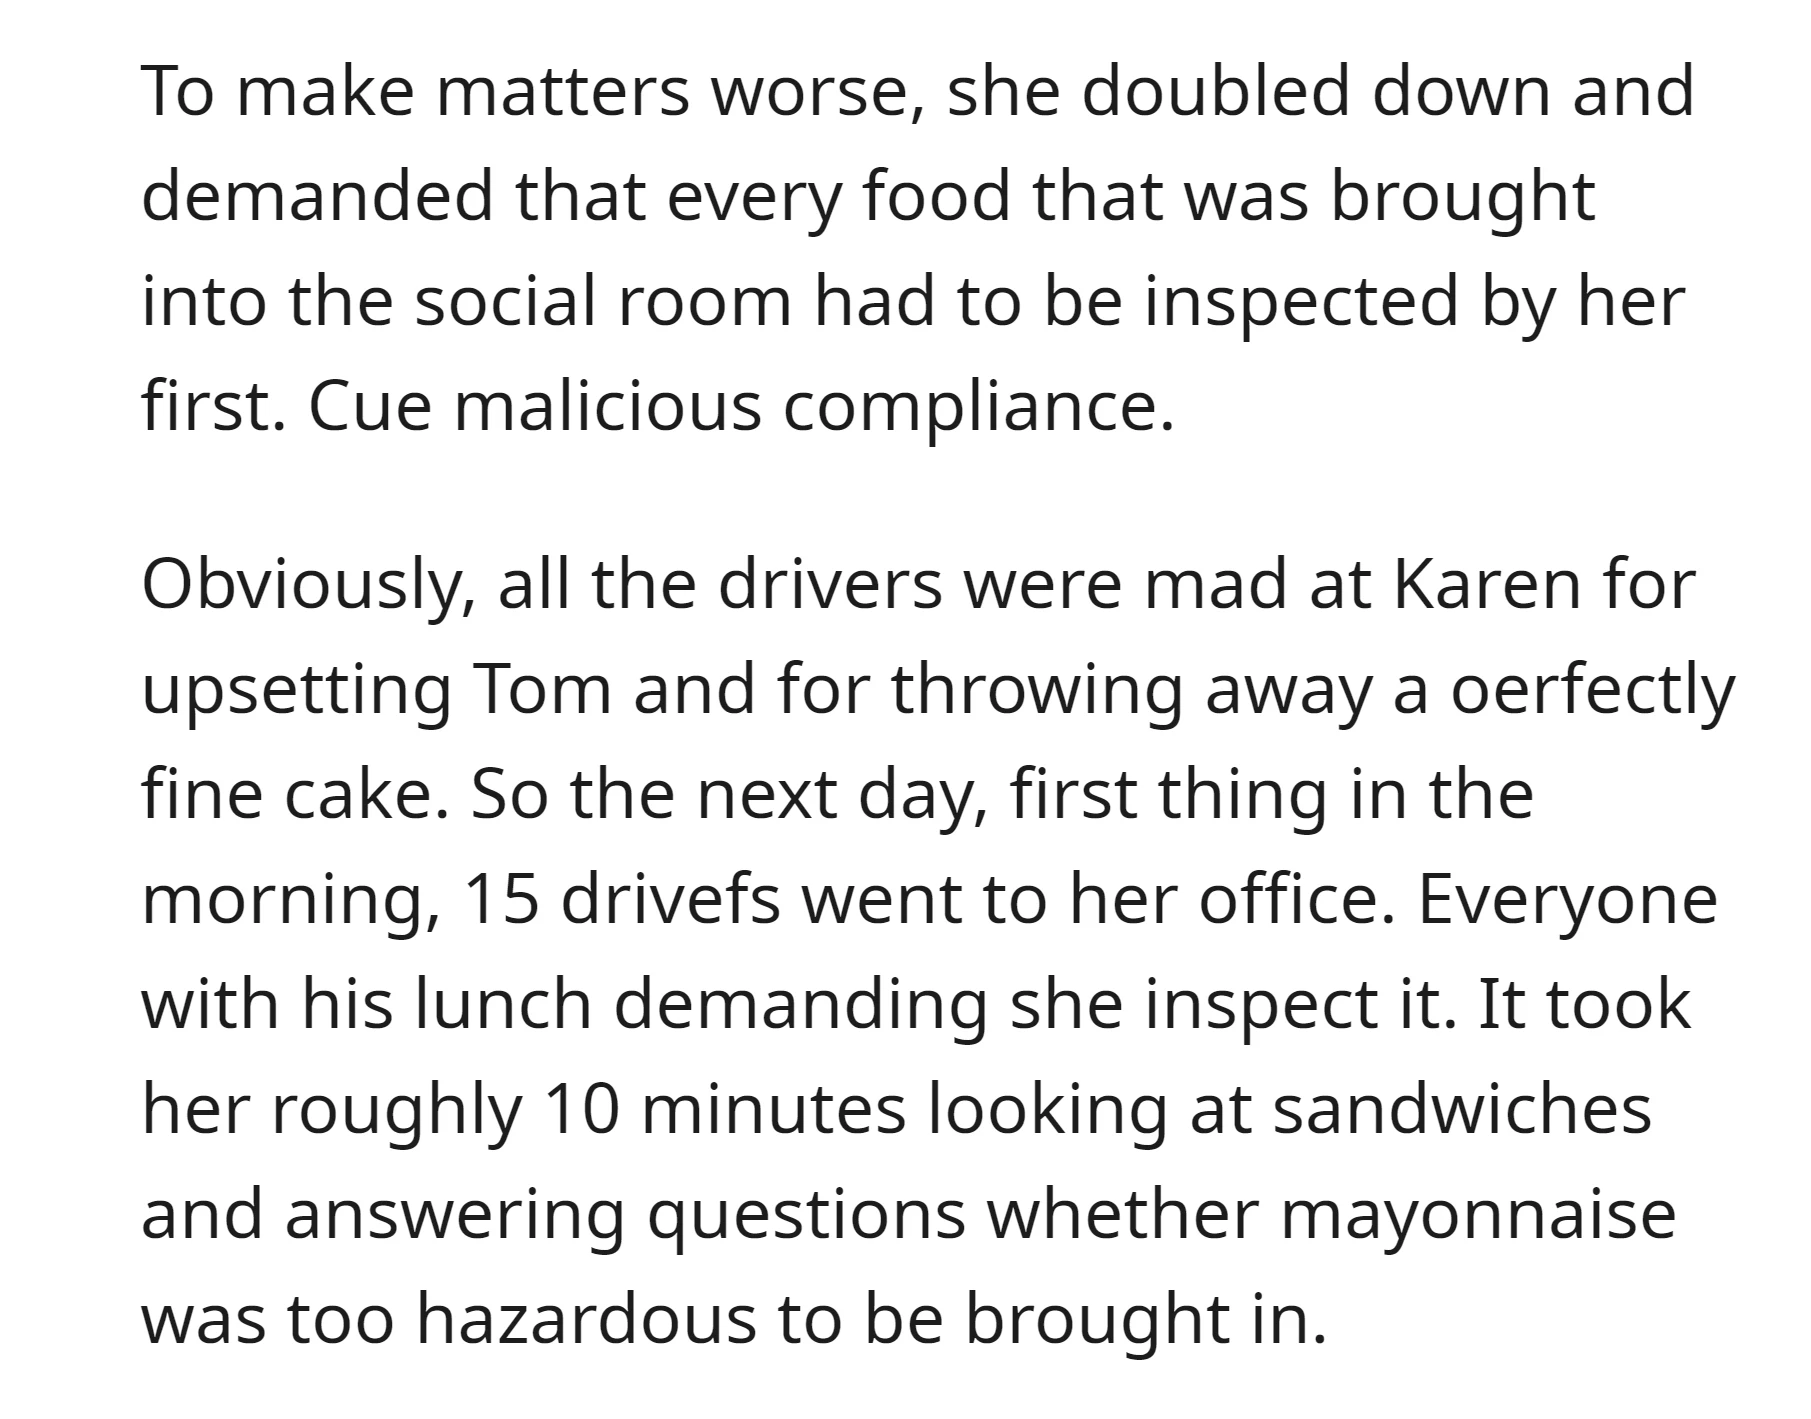 The drivers, in an act of malicious compliance, confronted her with their lunches the next day